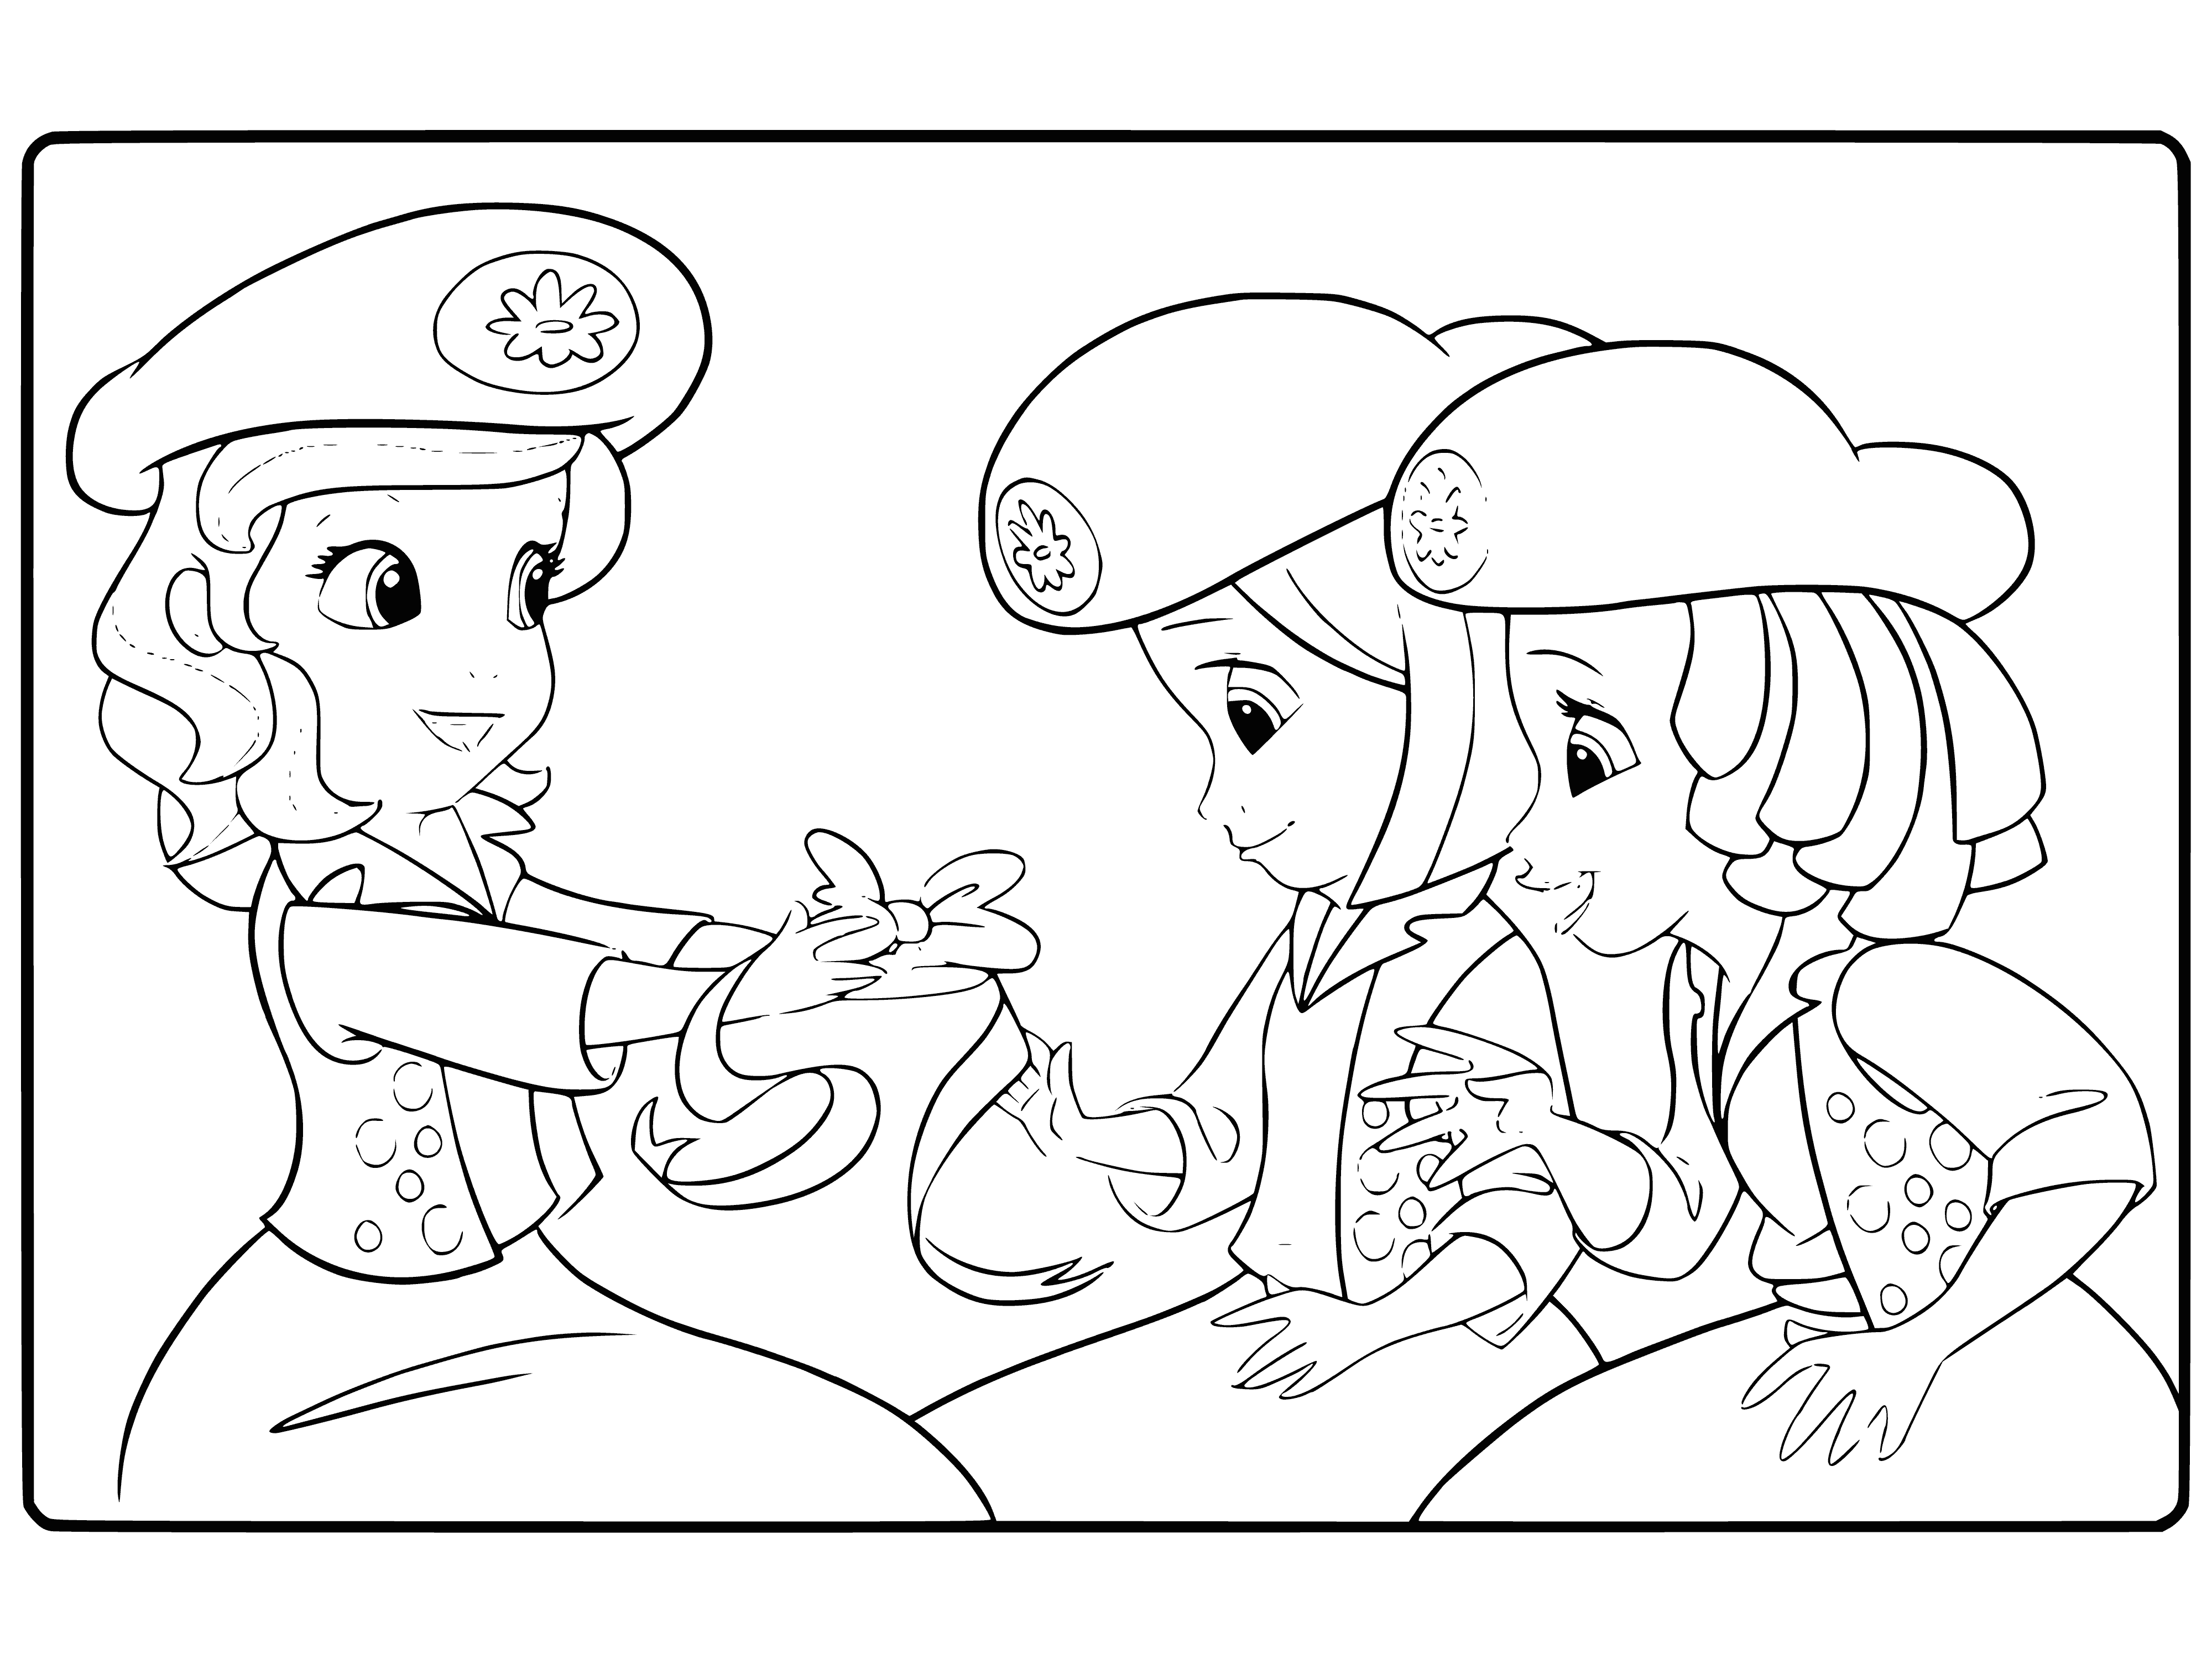 Princess Sofia with girlfriends coloring page